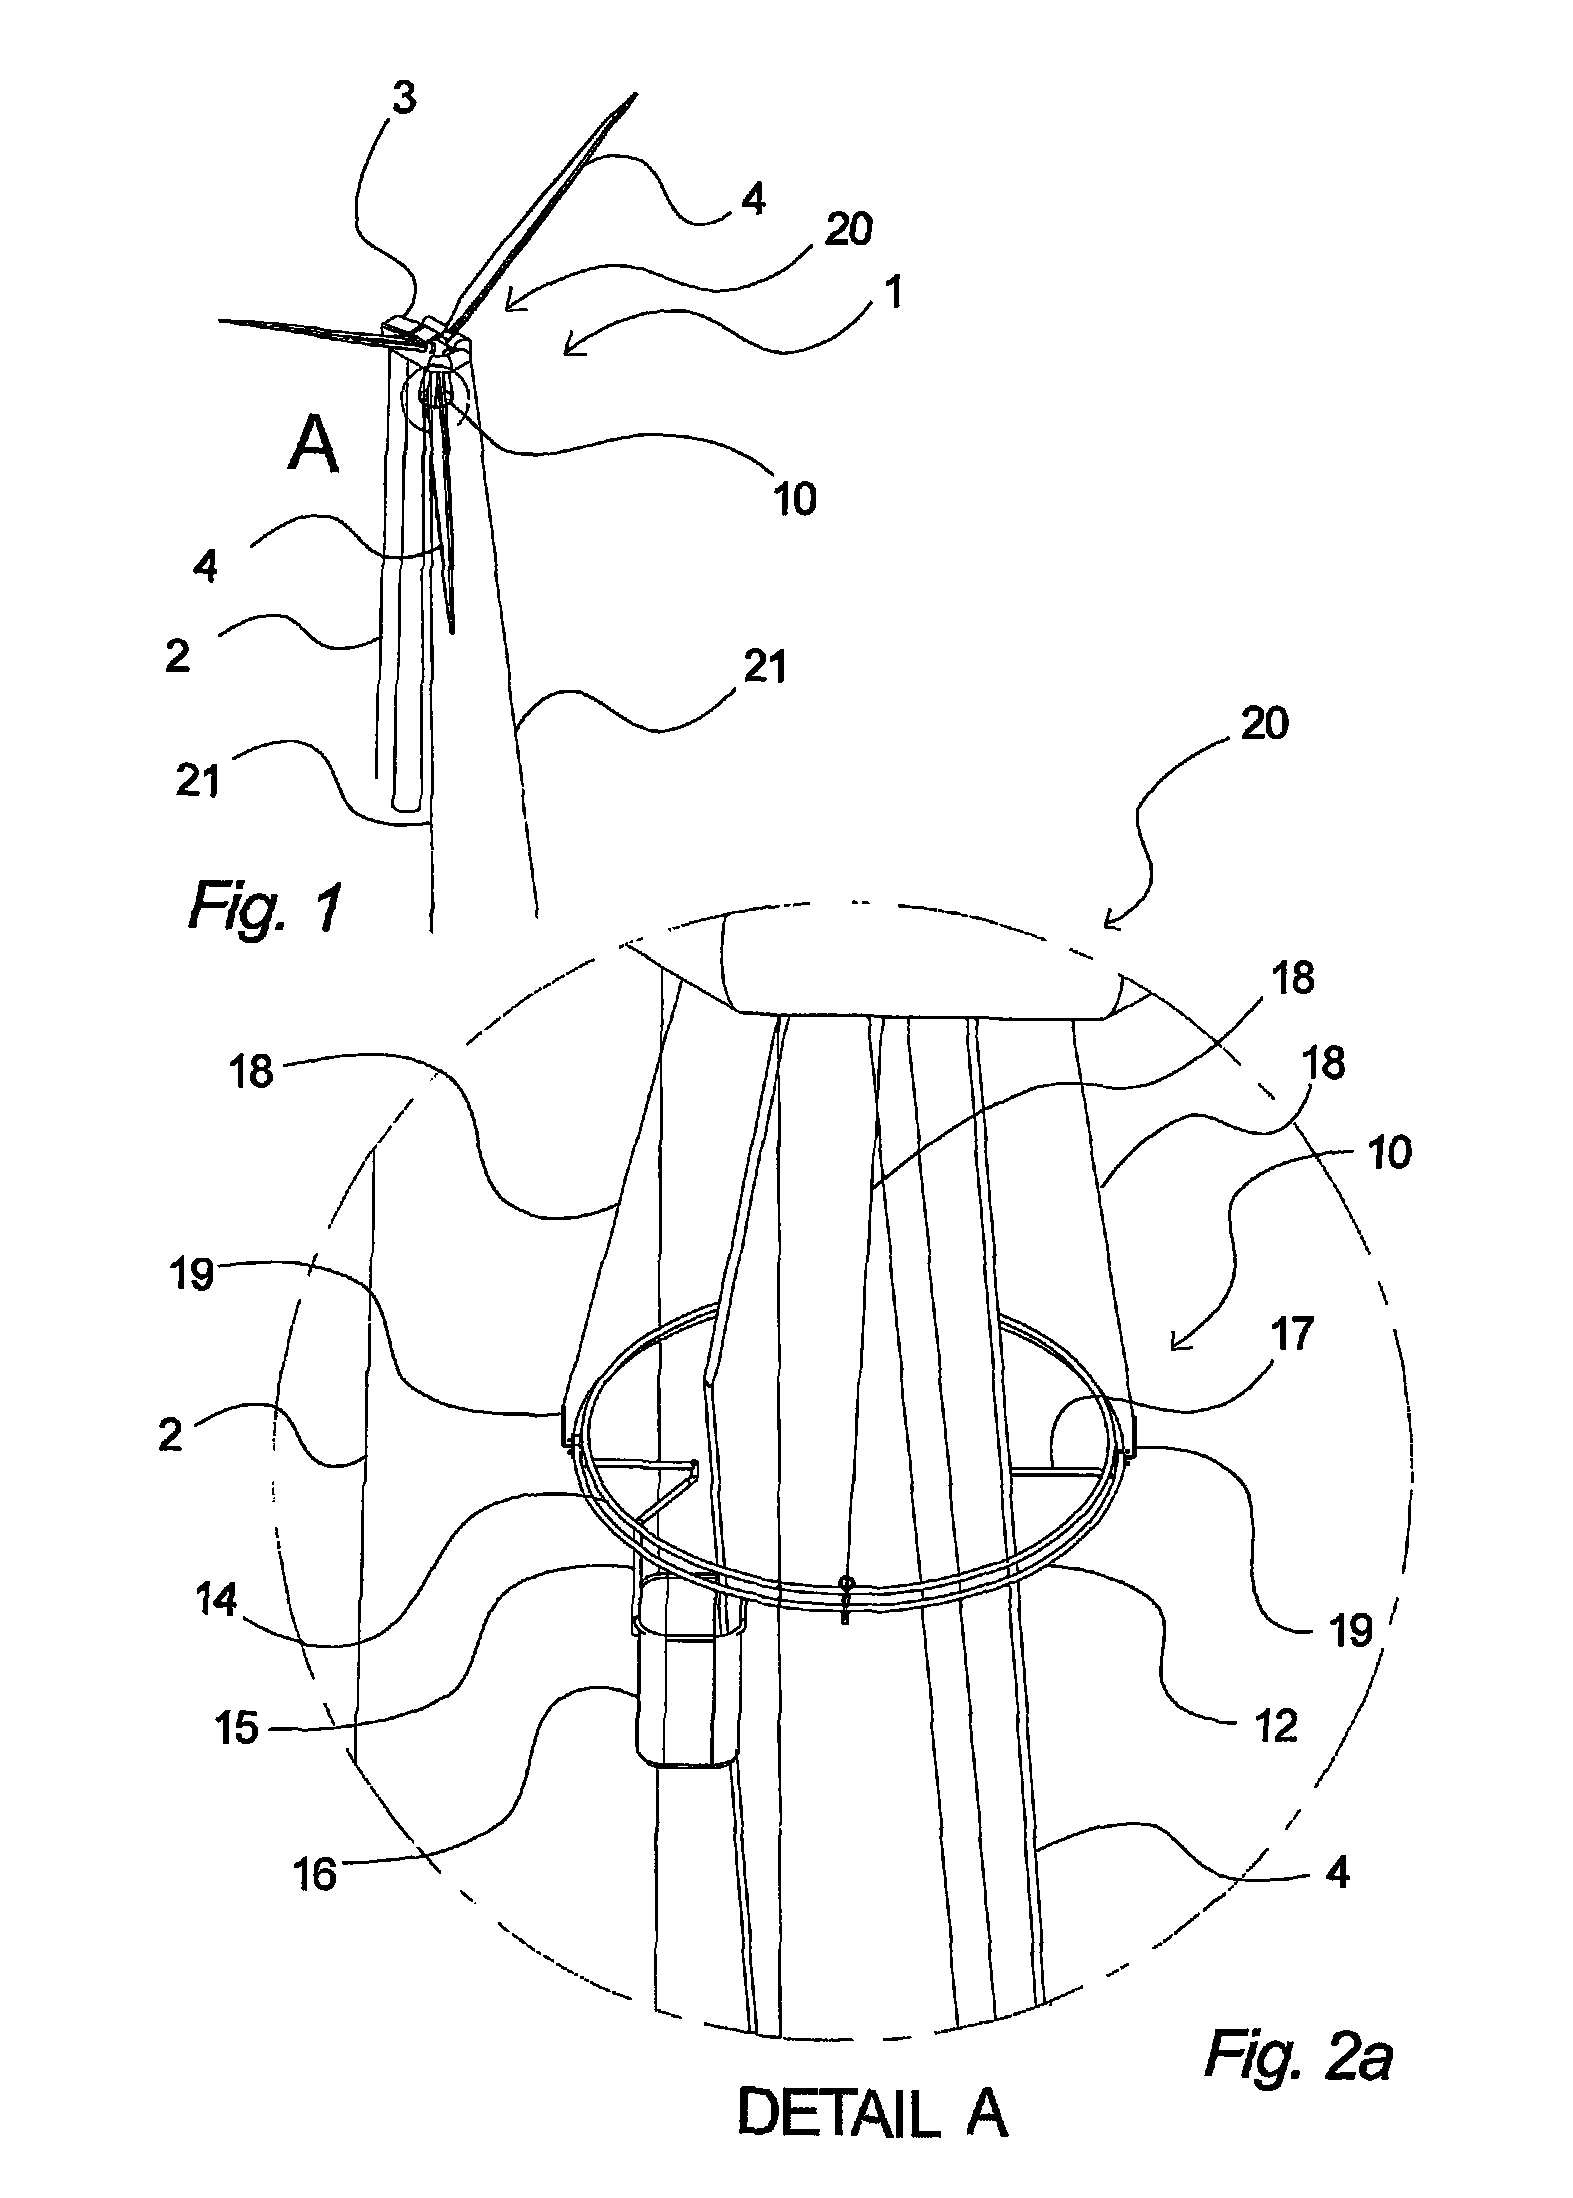 Device for enabling access to a structure above ground level